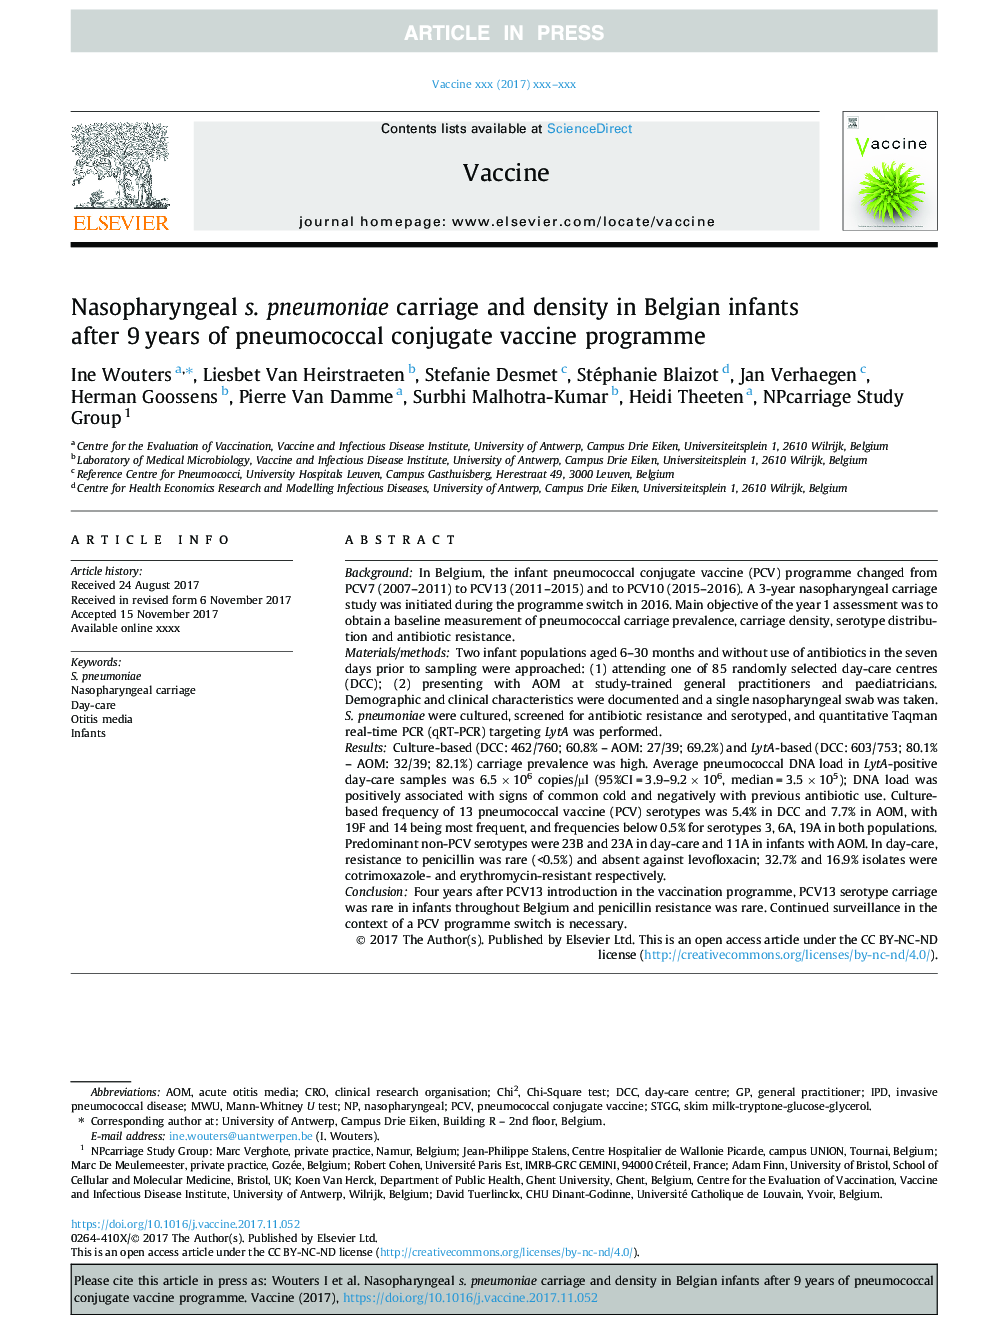 Nasopharyngeal s. pneumoniae carriage and density in Belgian infants after 9â¯years of pneumococcal conjugate vaccine programme